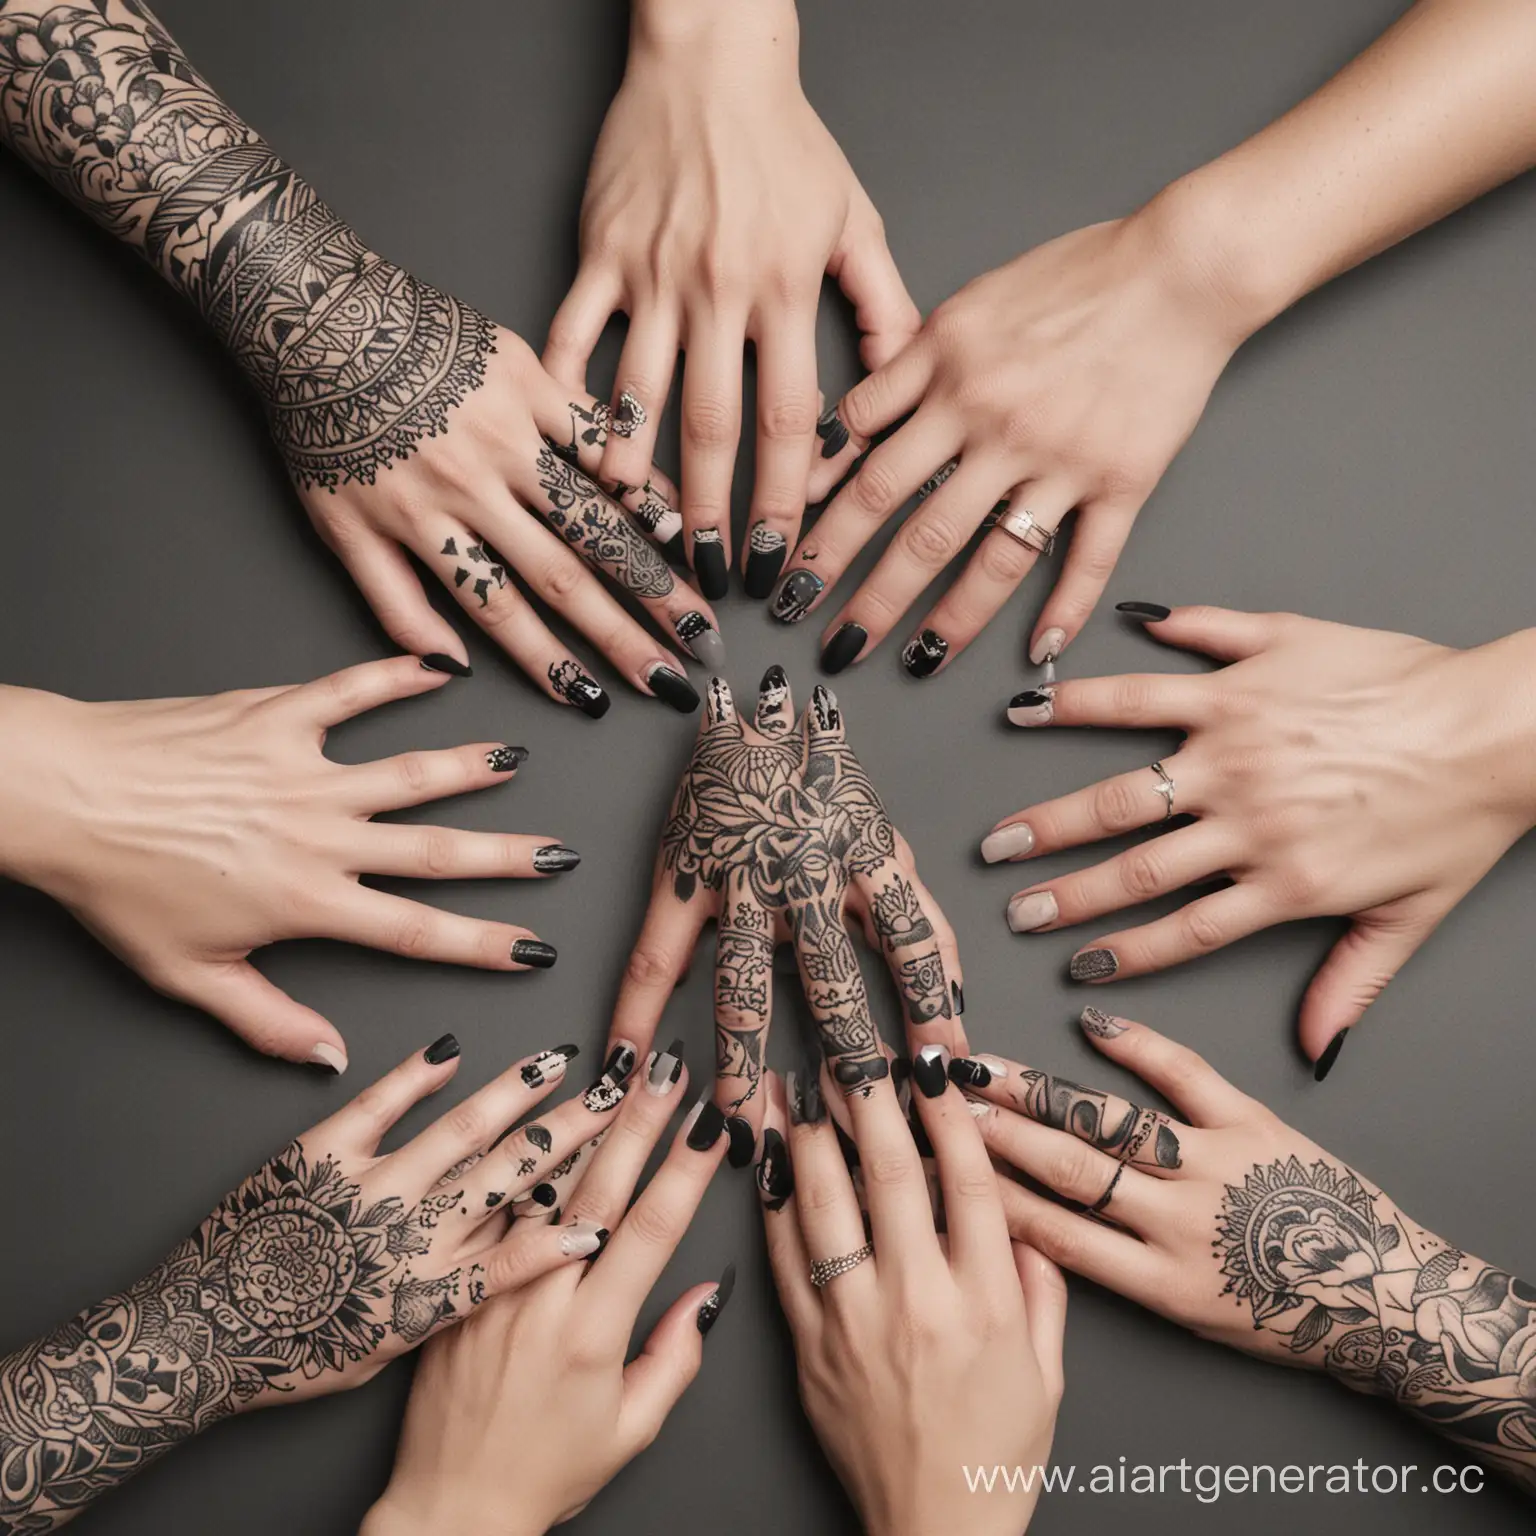 Diverse-Hands-Showcase-Intricate-BlackandWhite-Tattoos-and-Vibrant-Colored-Manicures